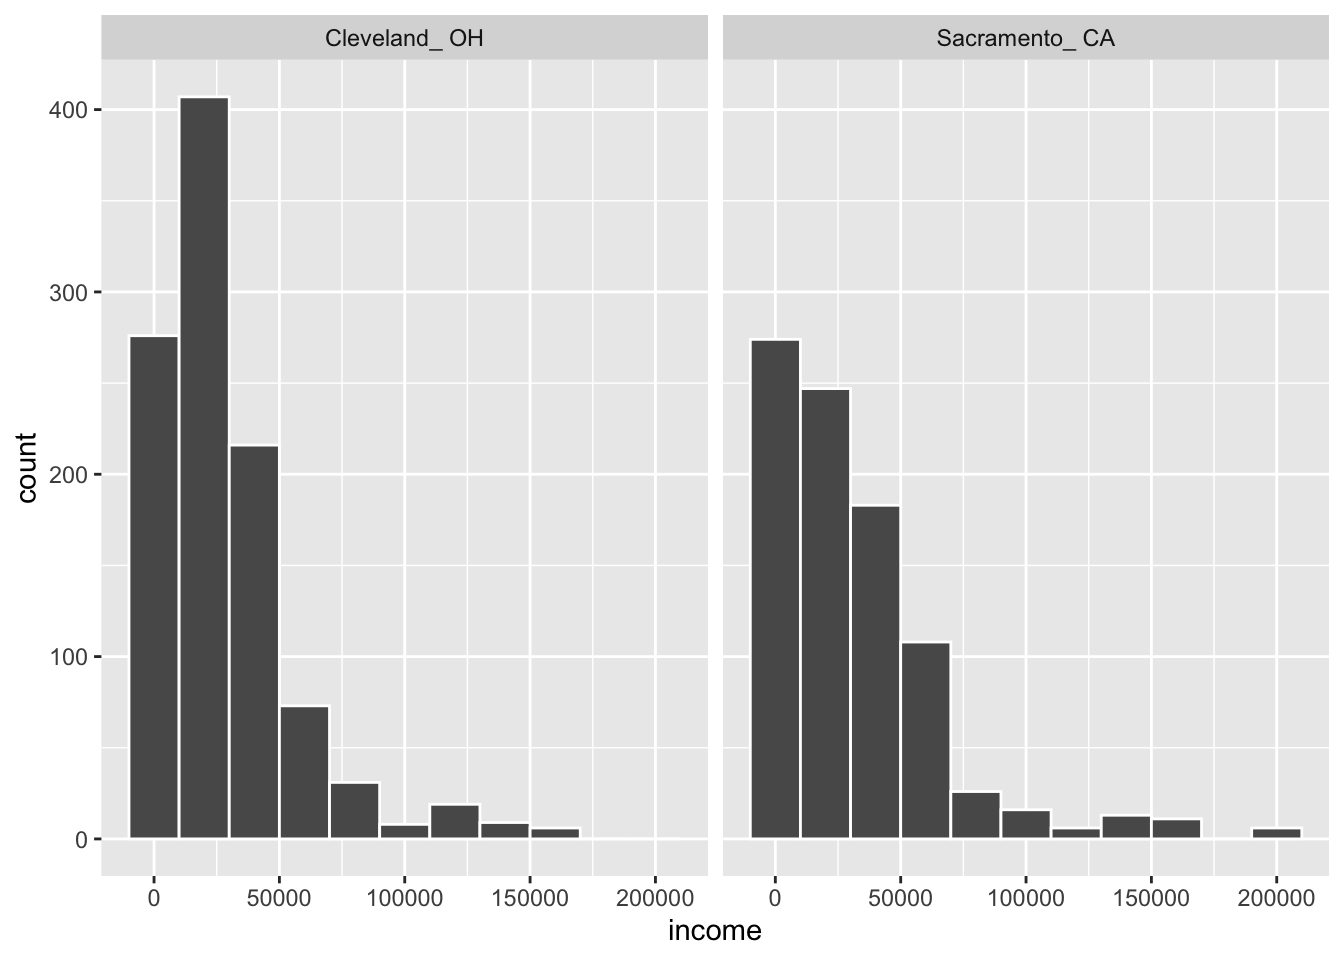 Distributions of income in two cities for Max's sample.